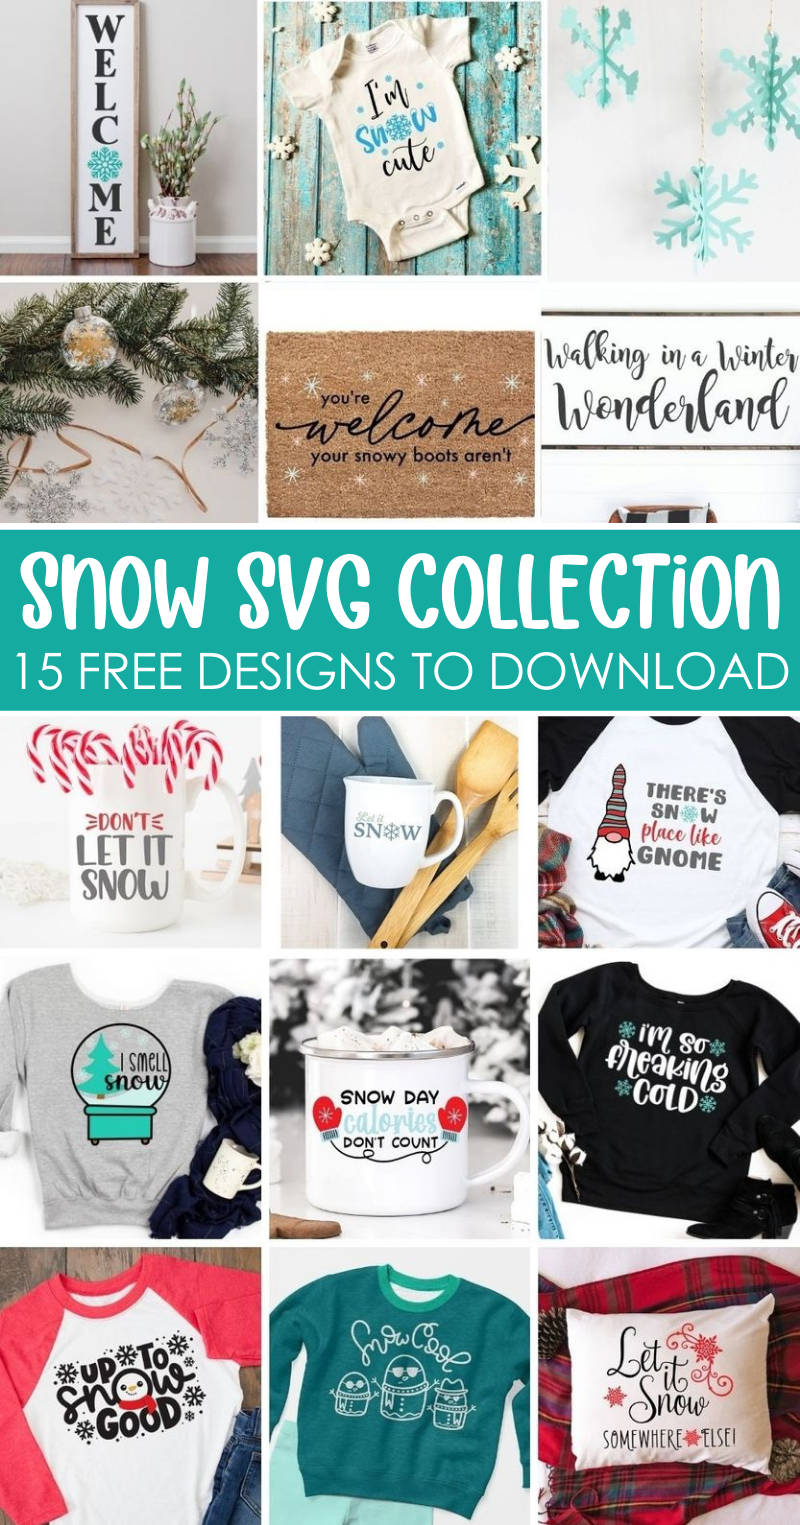 https://www.happygoluckyblog.com/wp-content/uploads/2020/12/Snow-SVG-Collection.png